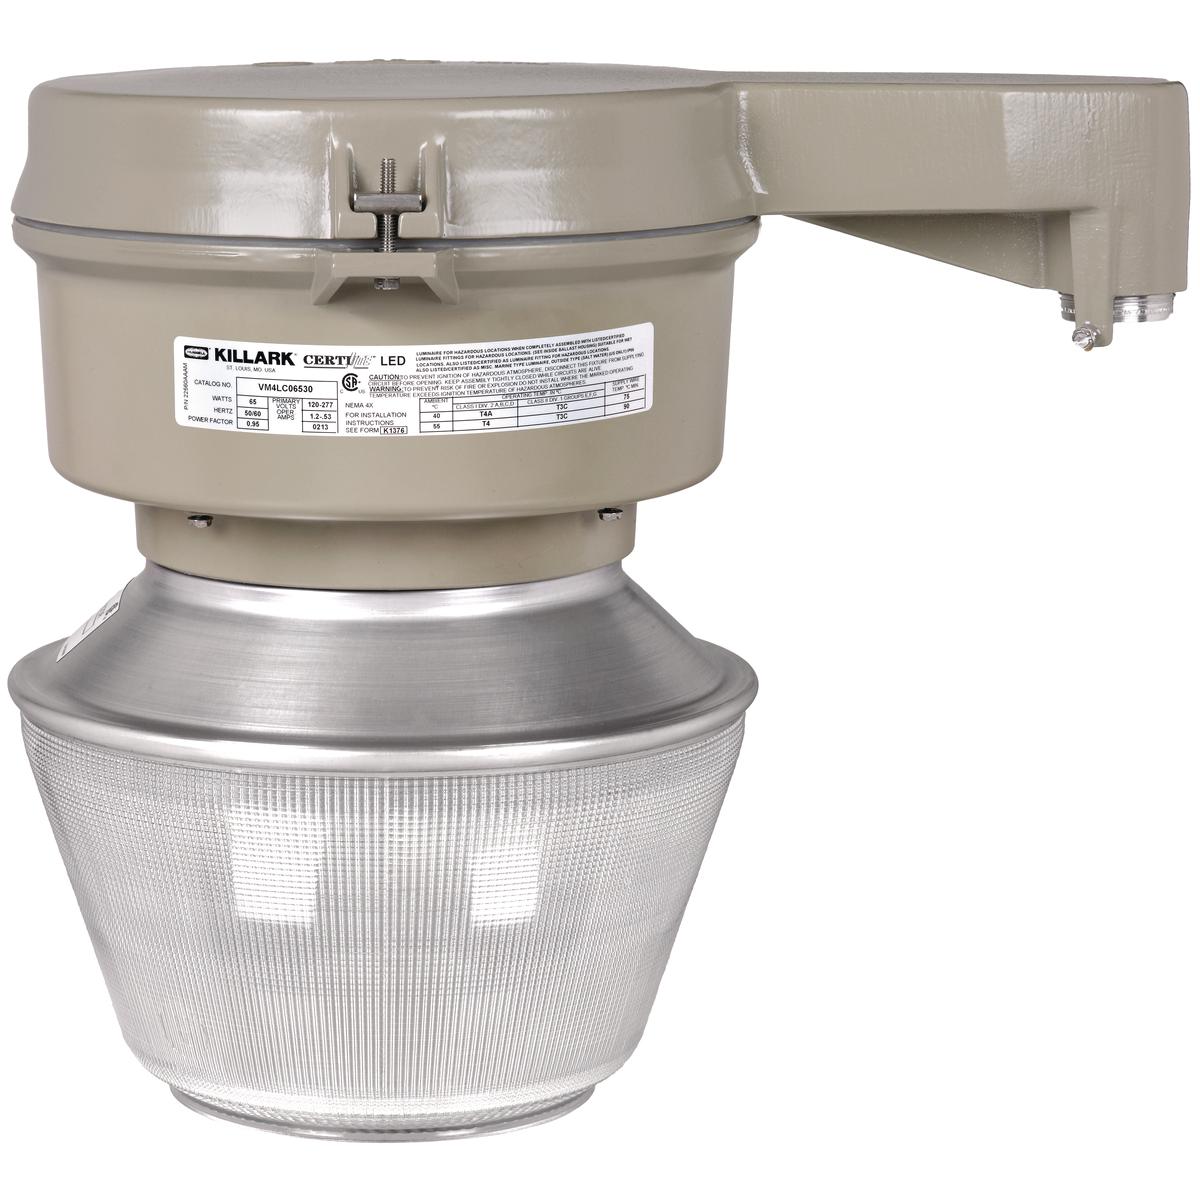 Hubbell VM4LC06530S5P5G The VM4L Series is a low bay and high bay fixture using energy efficient LED's. The design of the VM4LB with the bulb style heat sink creates a light distribution similar to a HID lamp. The design of the VM4LC with the concave style heat sink creates a li